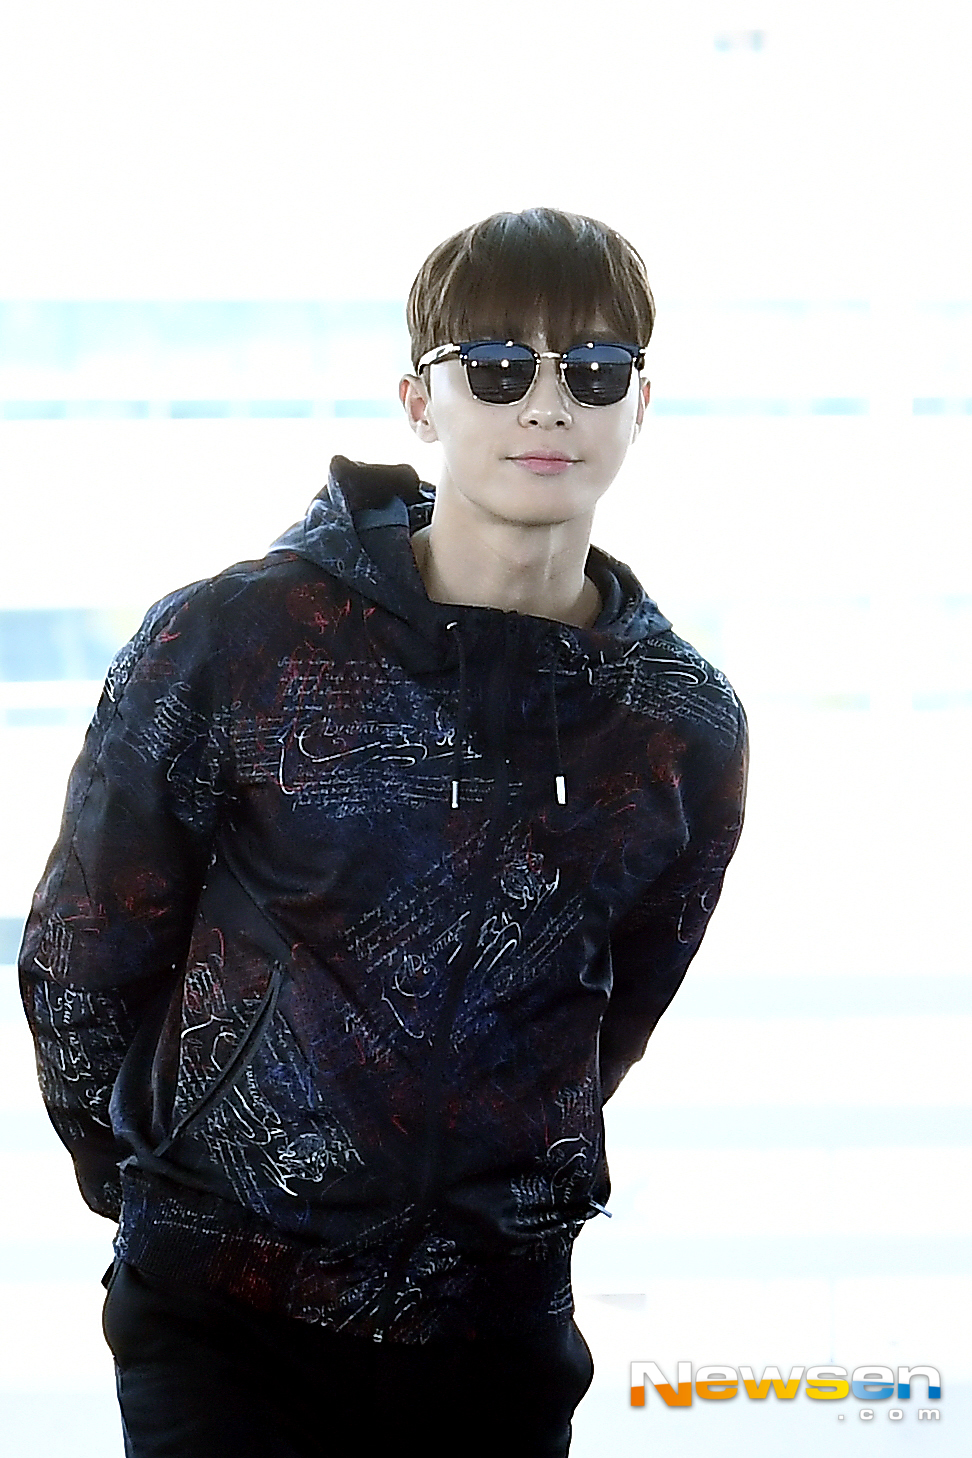 <p>Actor Park Seo-joon, this 2-October 7 a.m. Incheon Jung-operation in Incheon International Airport through a magazine photo shoot car United Kingdom London as your departure.</p><p>Actor Park Seo-joon this airport fashion to and United Kingdom London as your departure.</p>